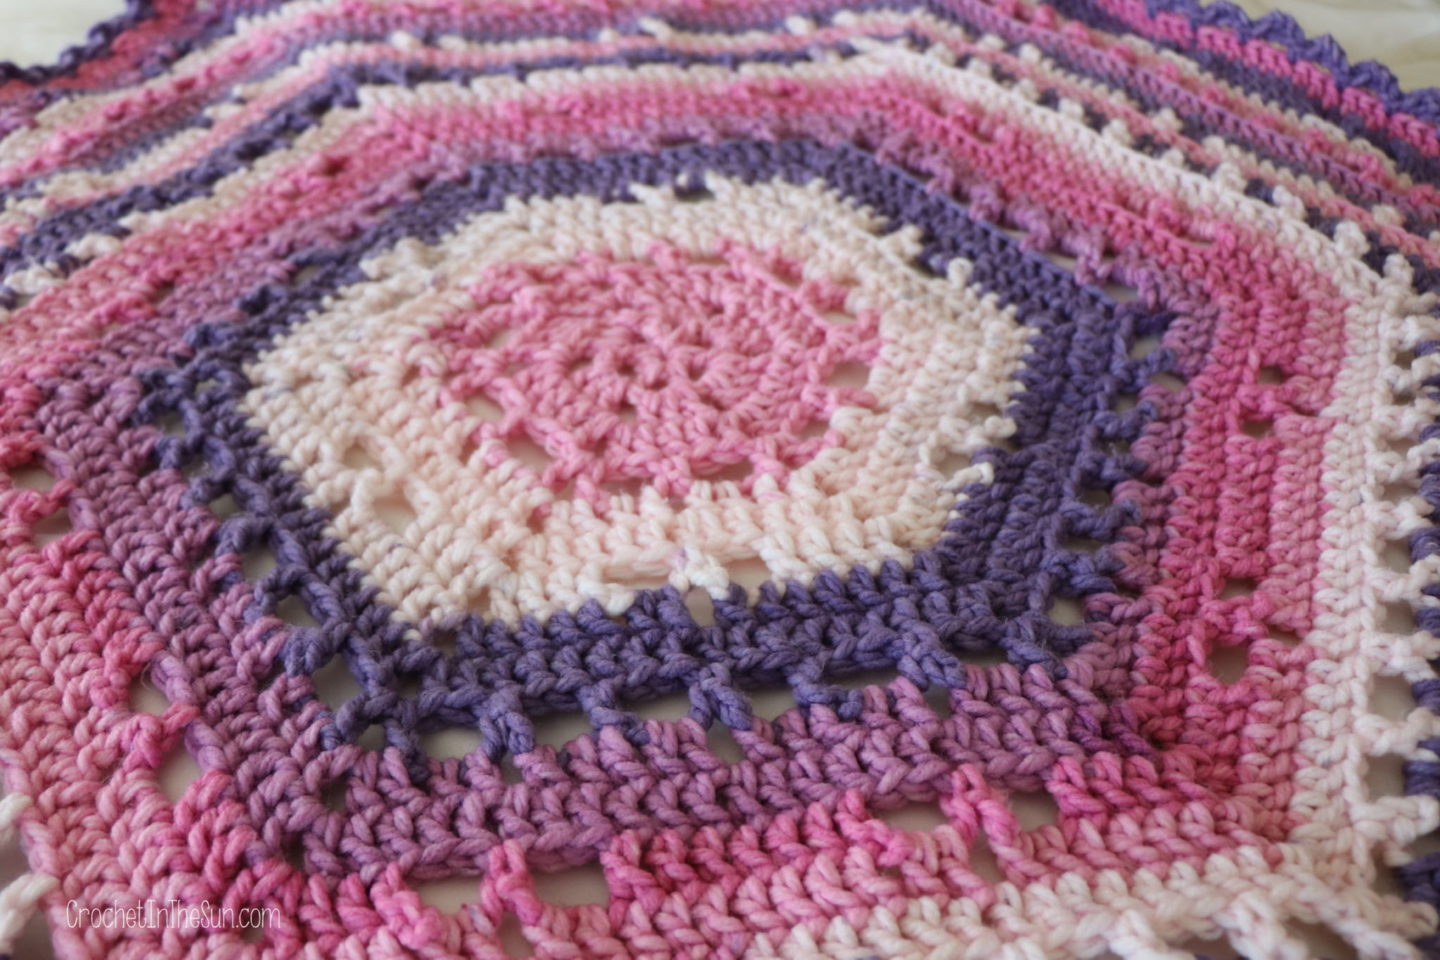 Crochet In the Sun tries the Cloudberry blanket